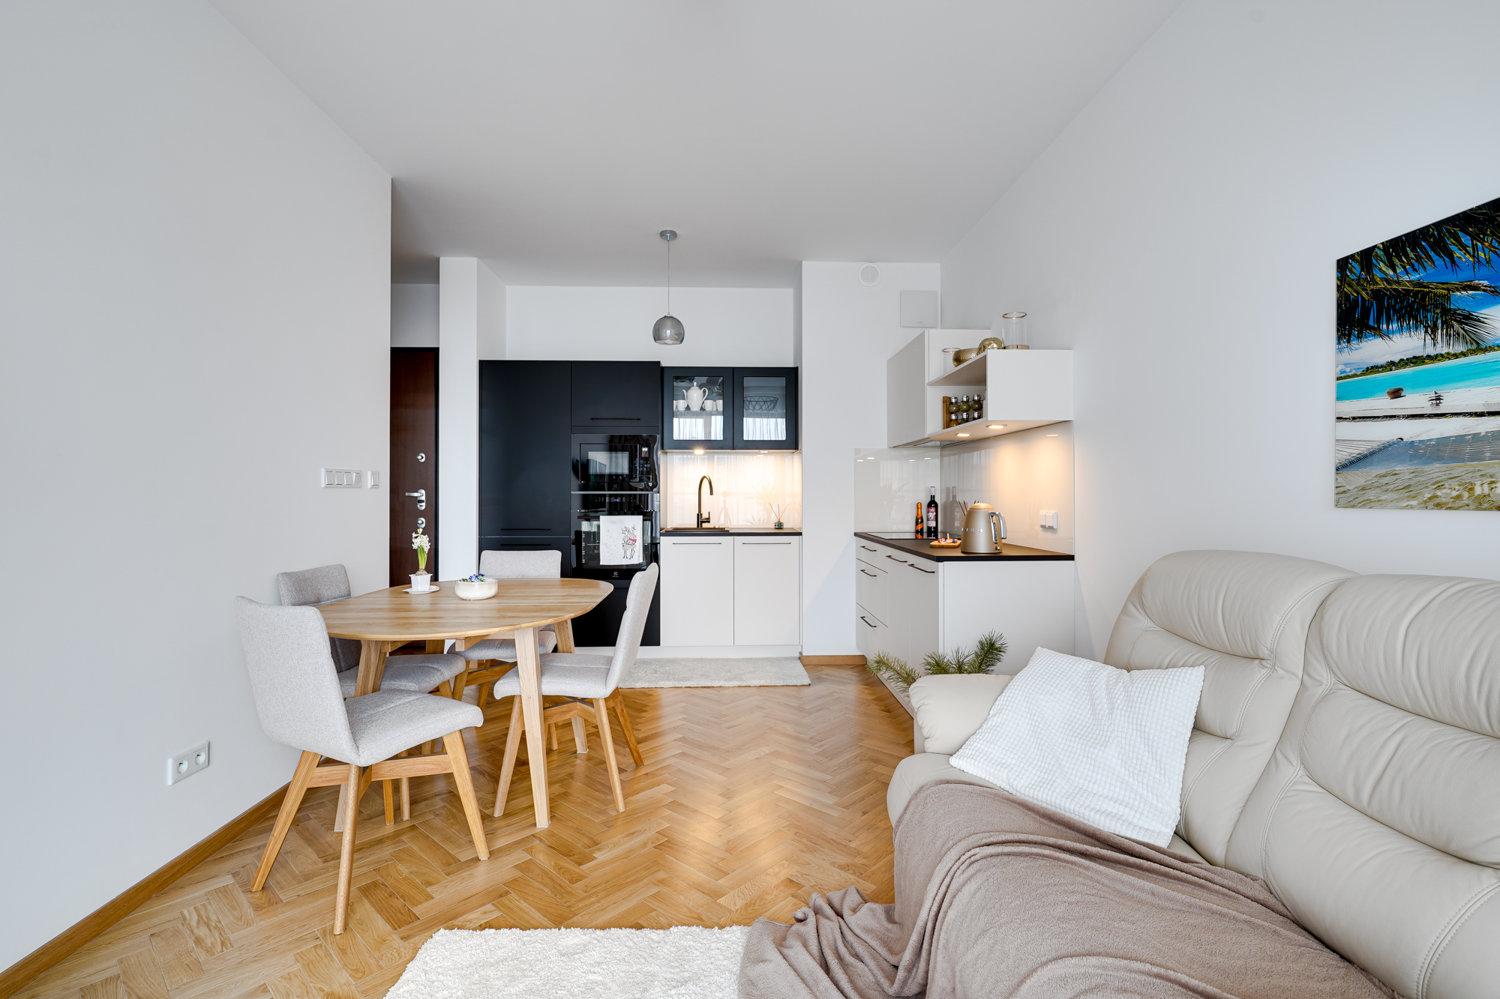 An eclectic style apartment - a comfortable package